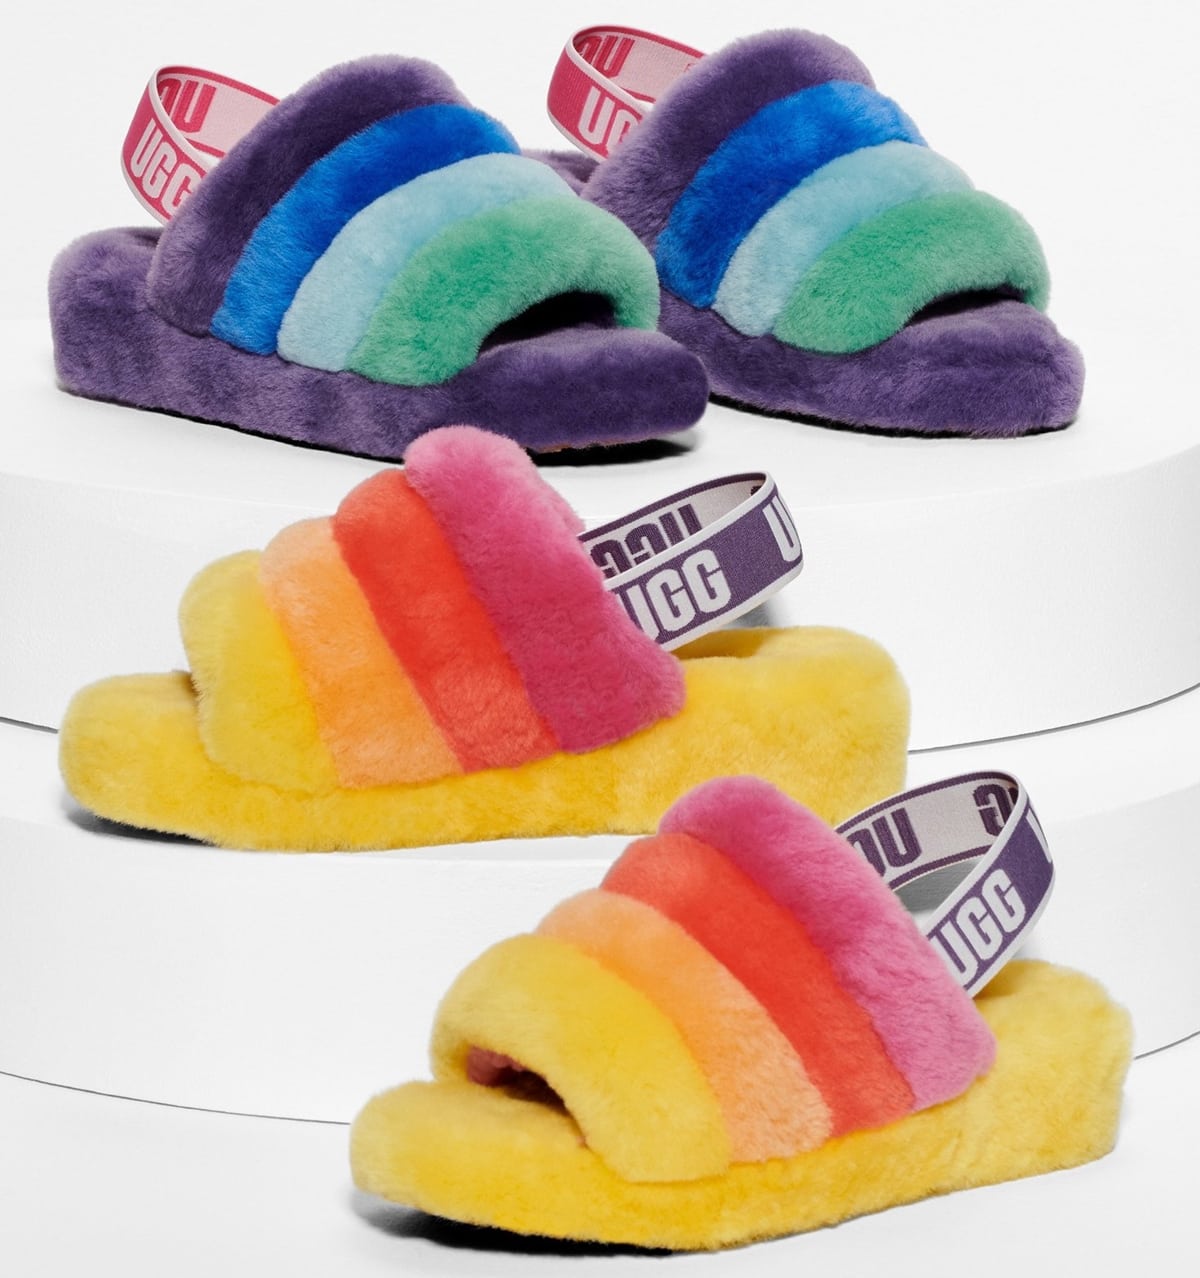 Whether you're in the comfort of your home or out on the town, the Fluff Yeah Slide sandal slippers from UGG get you style and comfort that's out of this world